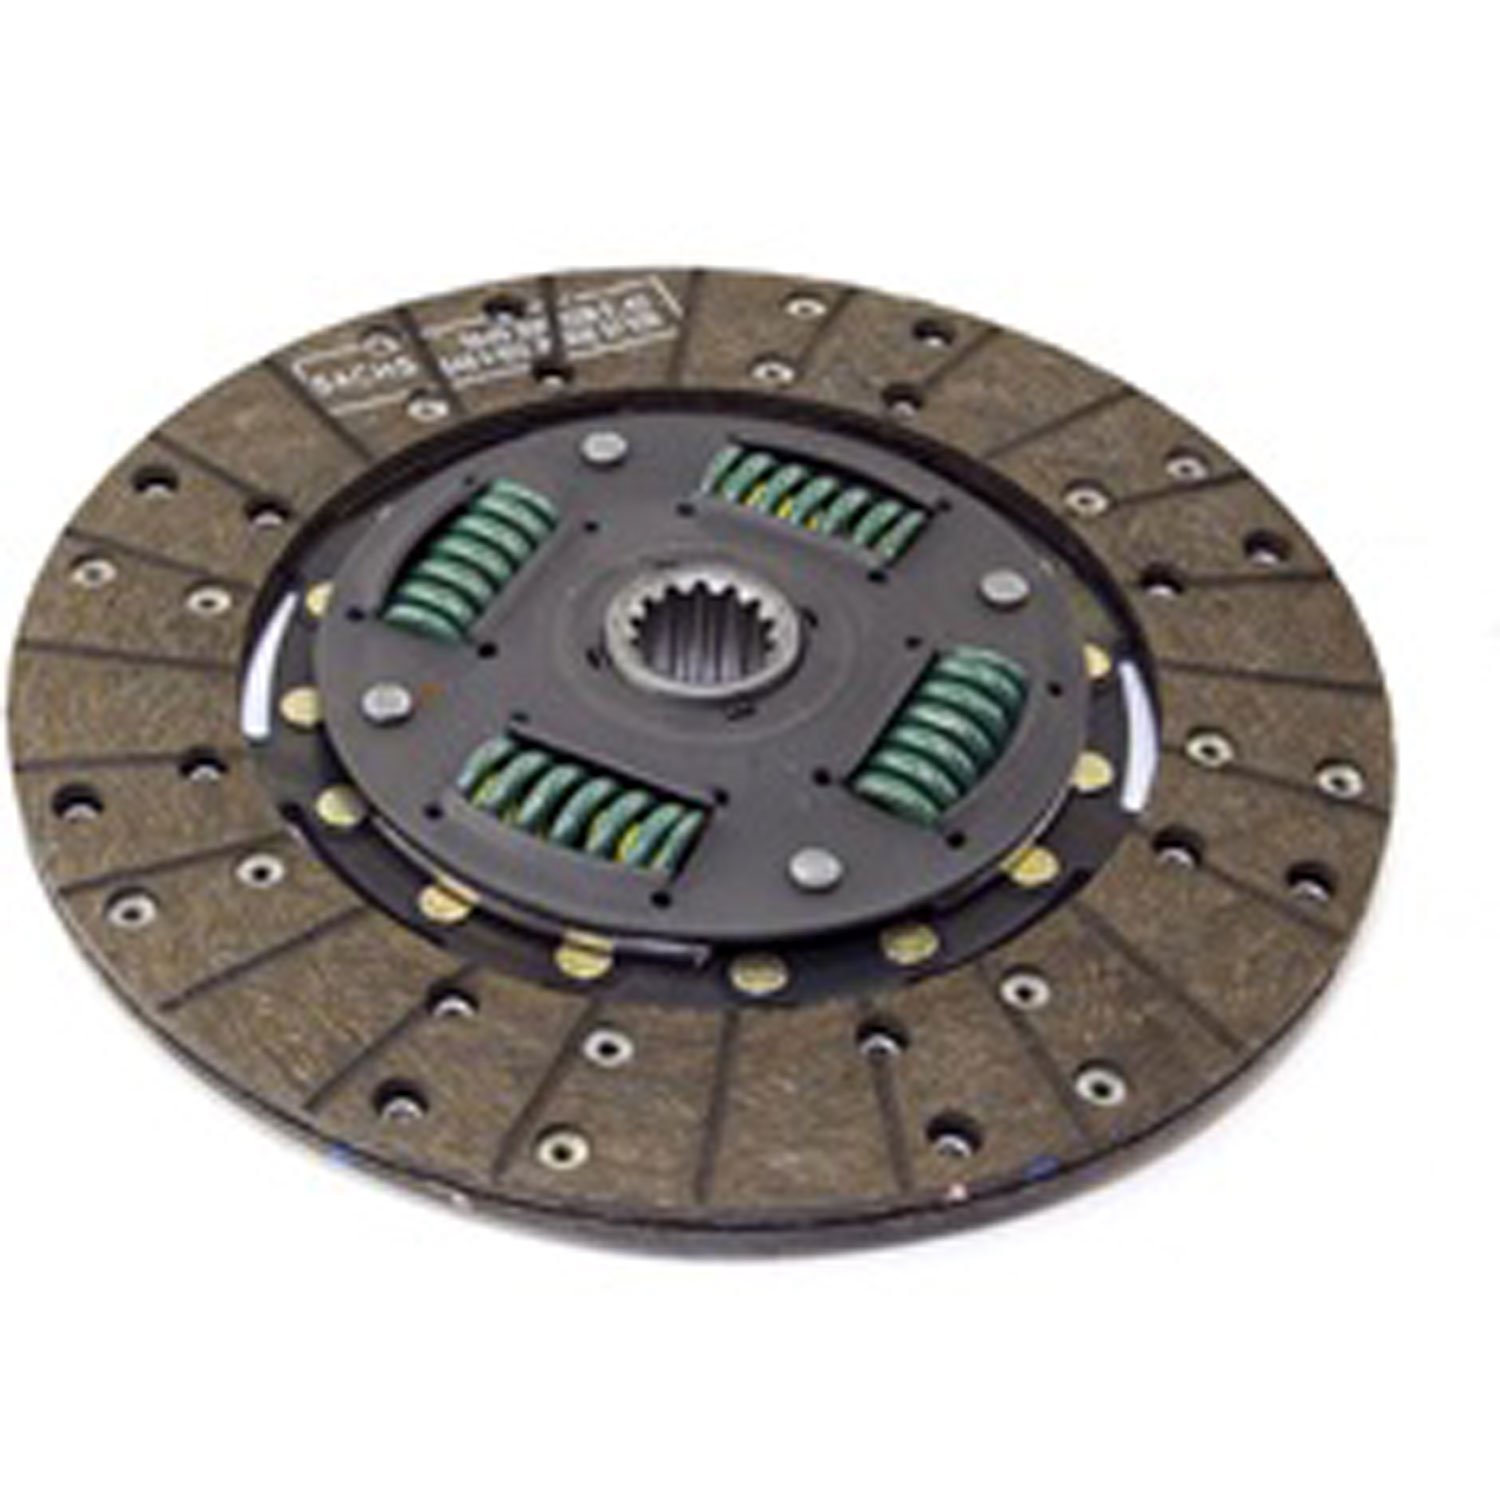 Replacement clutch disc from Omix-ADA, Fits 83-86 Jeep CJs 87-90 Cherokees and 87-90 Wranglers with a 2.5L engine.